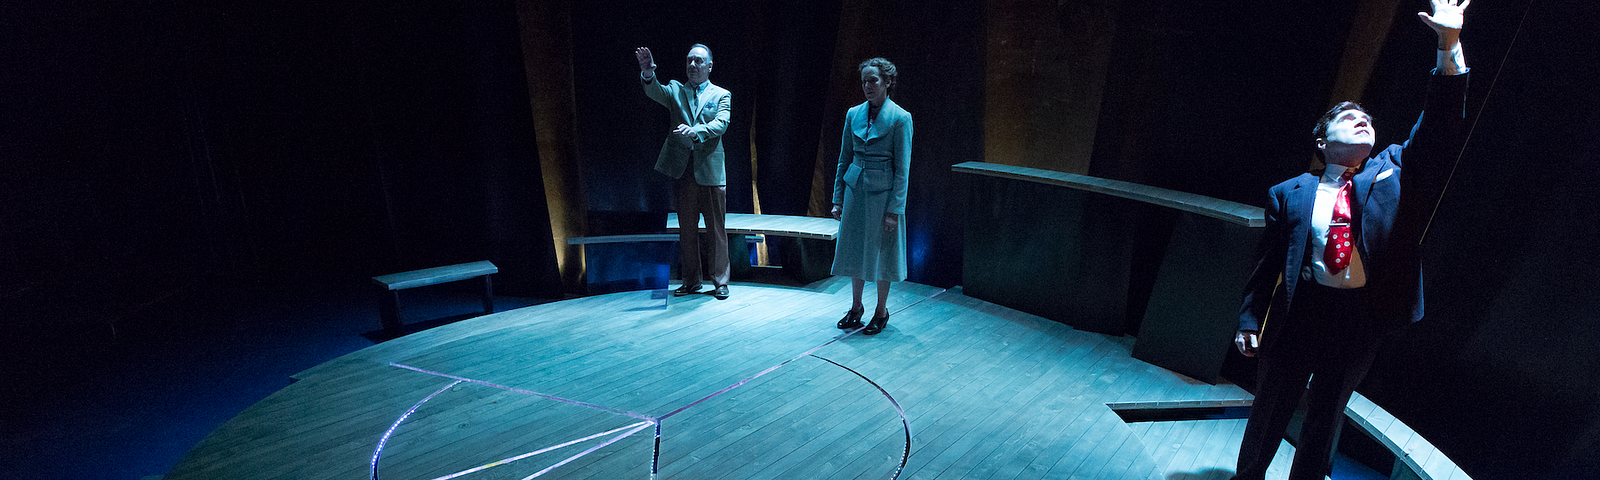 Three people in 1940s clothing stand on a stage with a circular platform in blue light